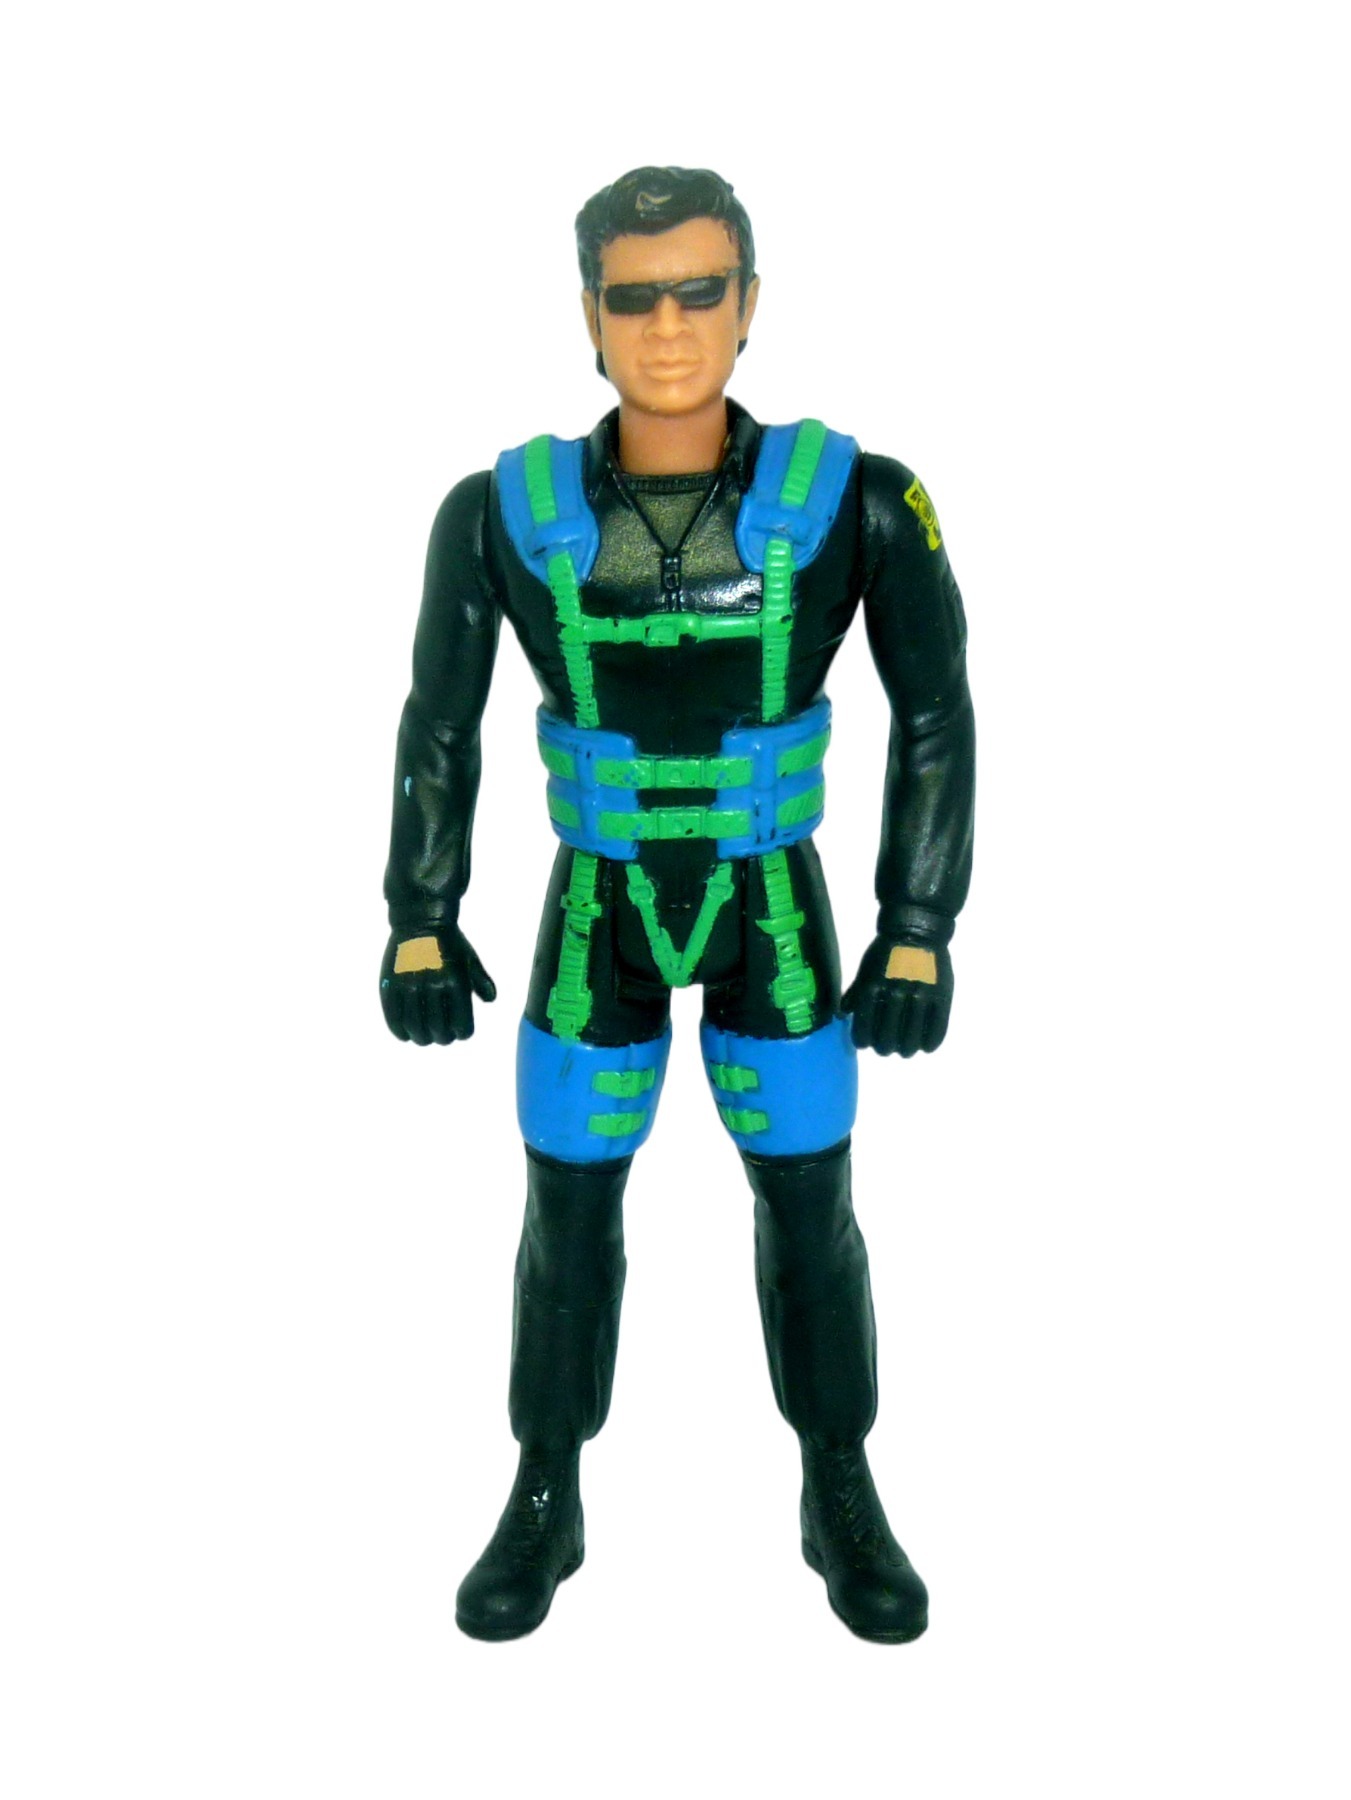 Dr Ian Malcolm - Glider Pack Kenner 1996